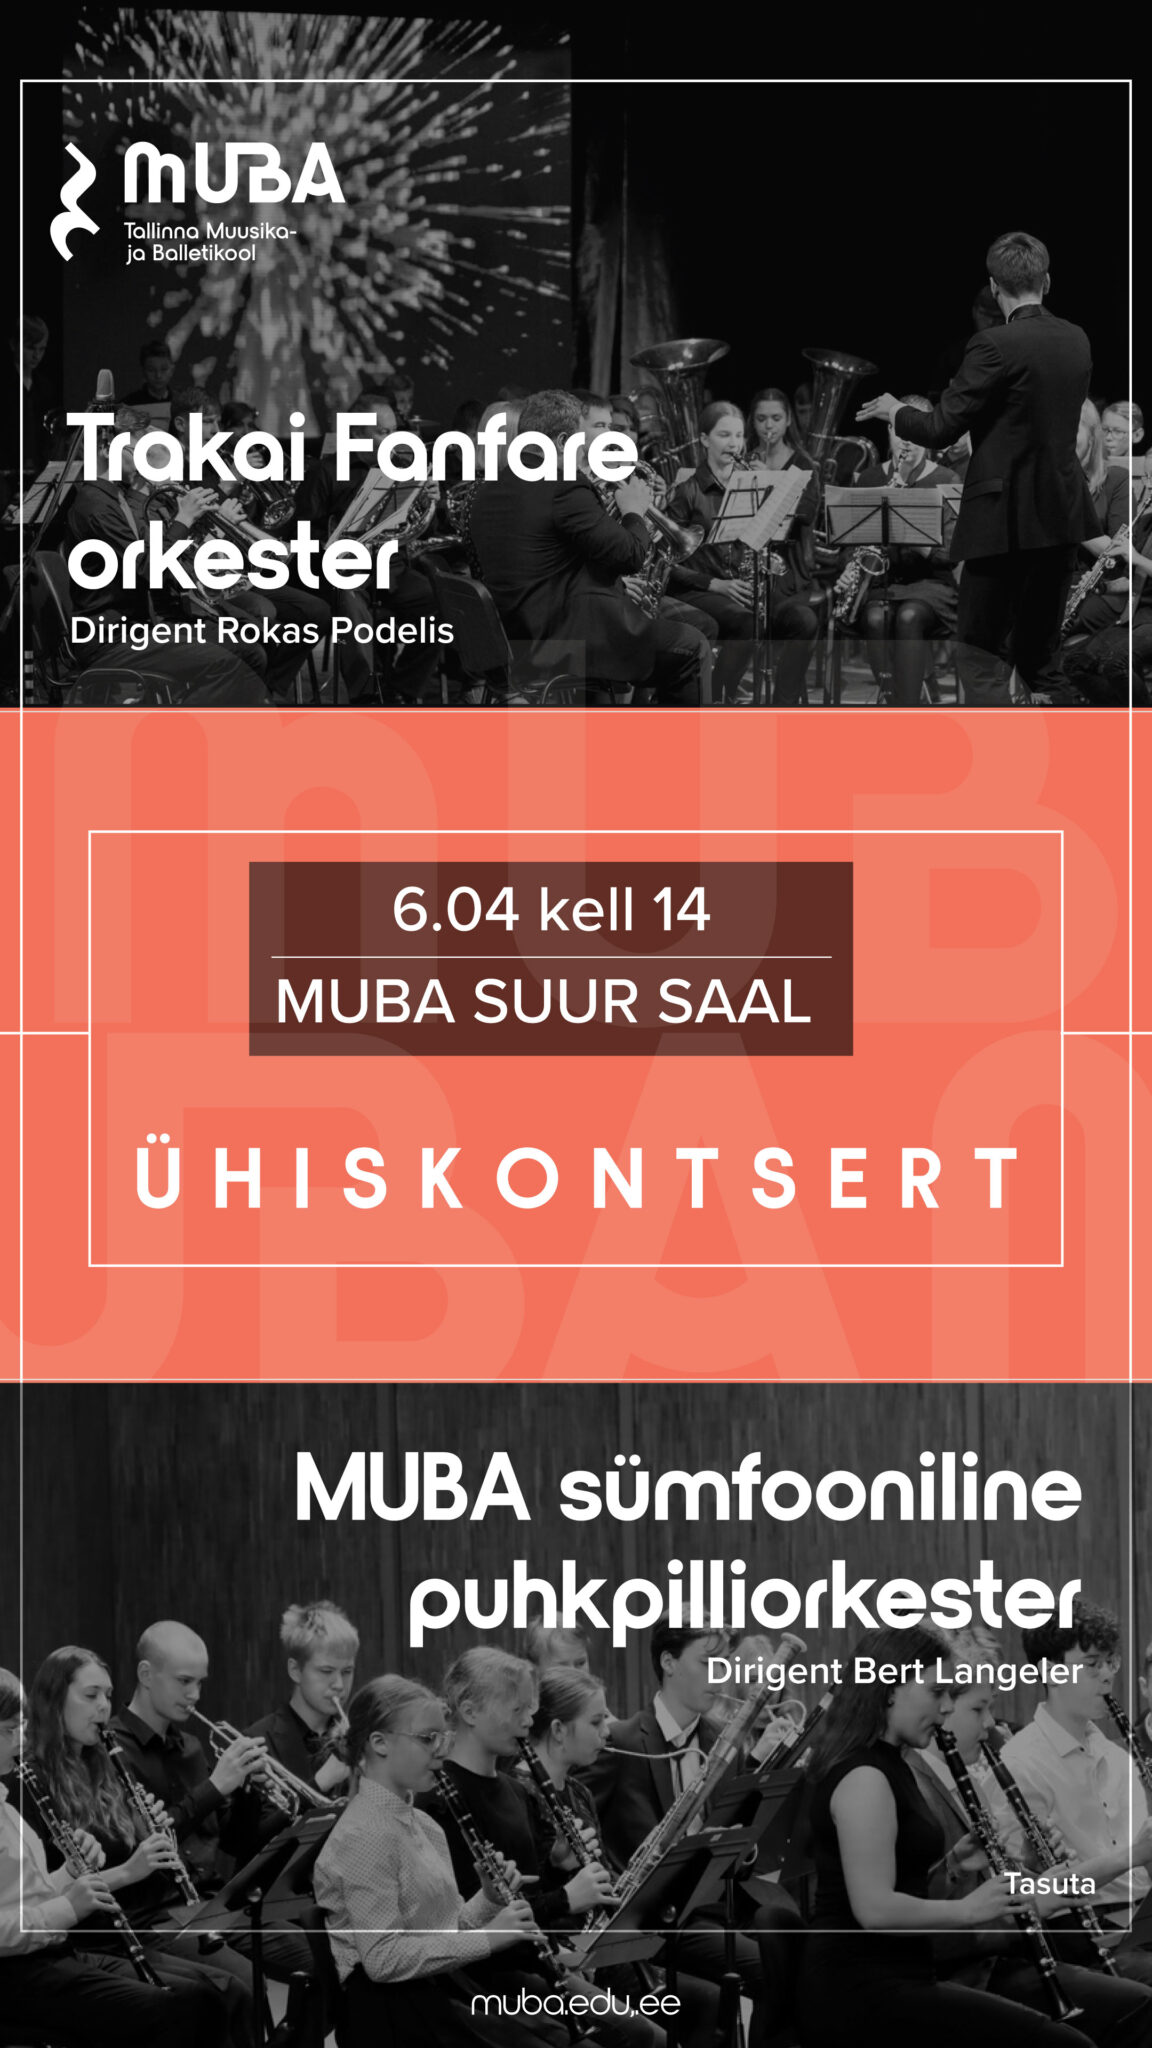 Trakai Fanfare Orchestra (Lithuania) and MUBA Symphonic Wind Orchestra concert